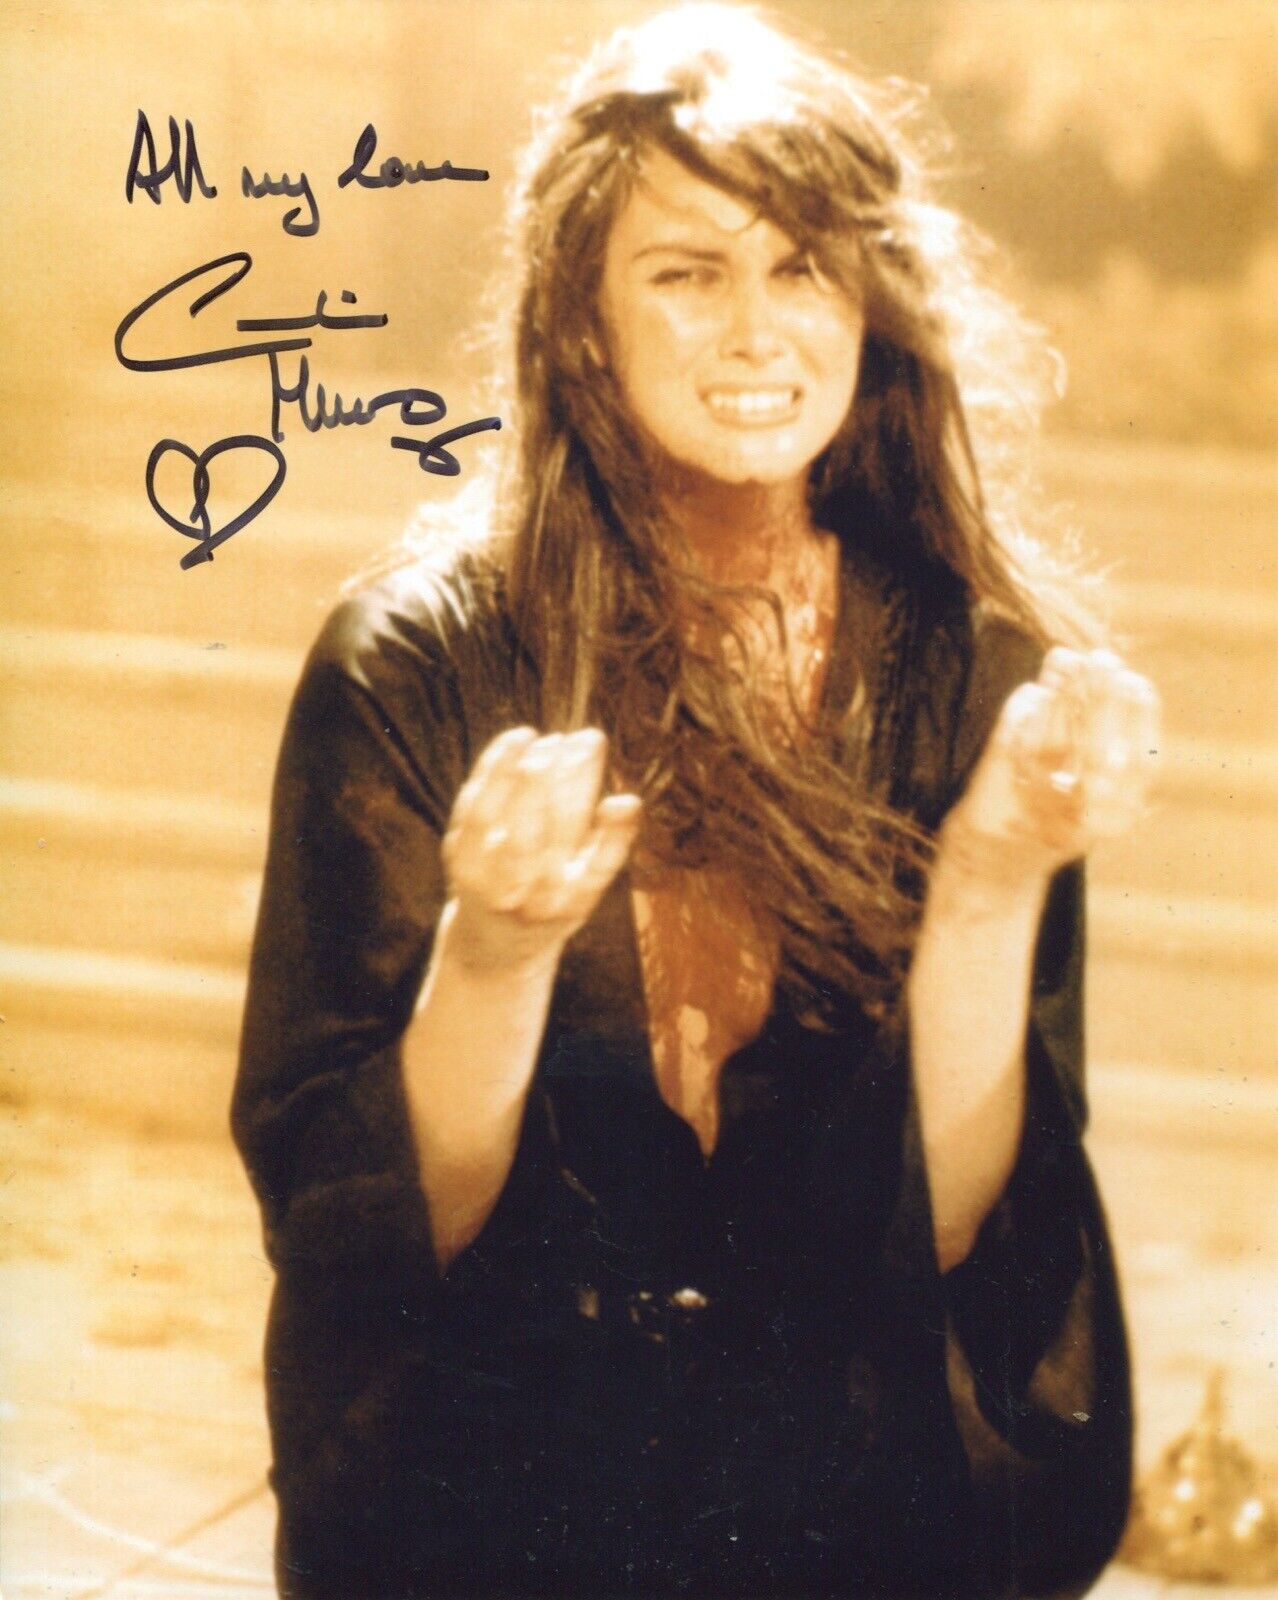 007 Bond girl Caroline Munro signed movie scene 8x10 photo. All autographs come with a Certificate